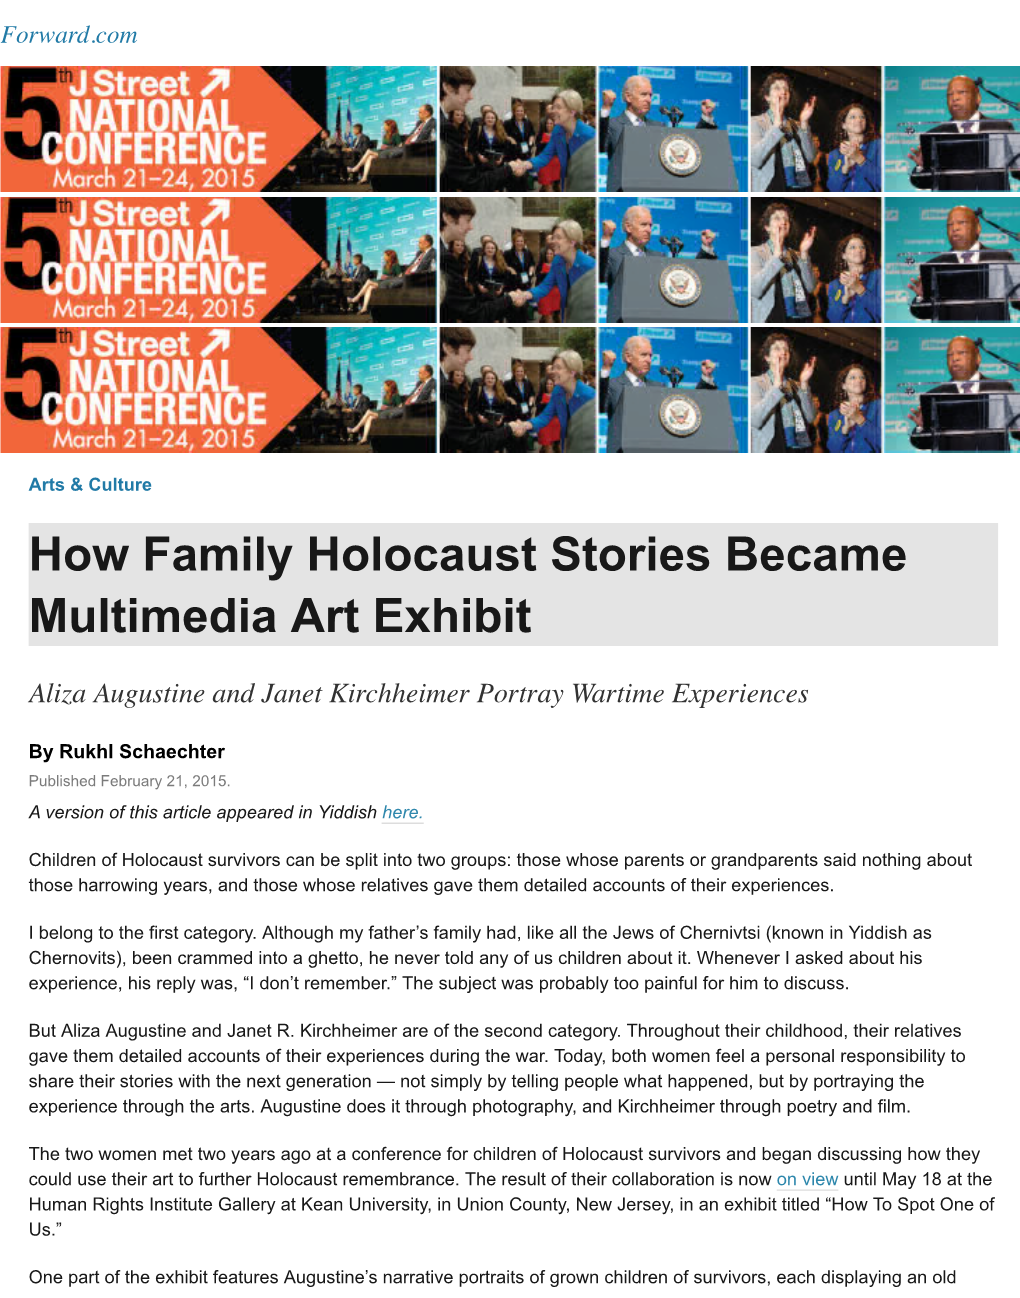 How Family Holocaust Stories Became Multimedia Art Exhibit